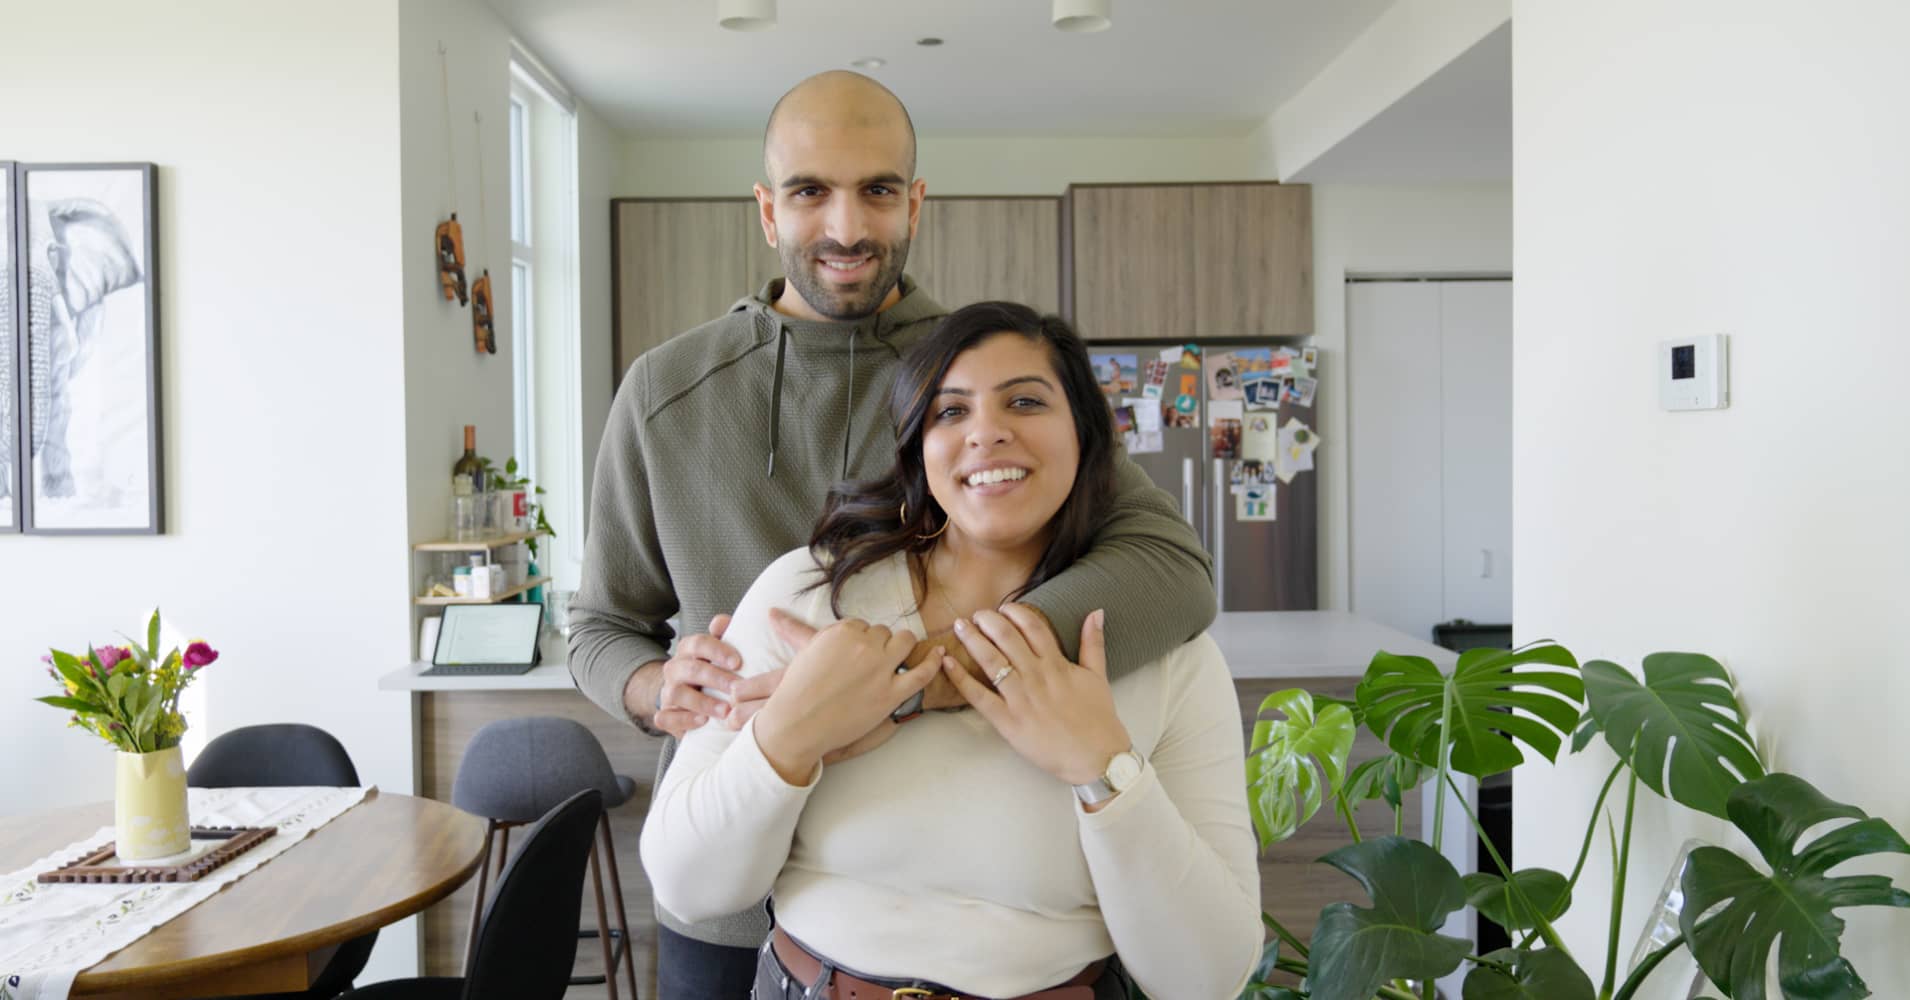 30-year-old couple earns $227,000 a year in chicago—and aims to save up $2.5 million by their 40s